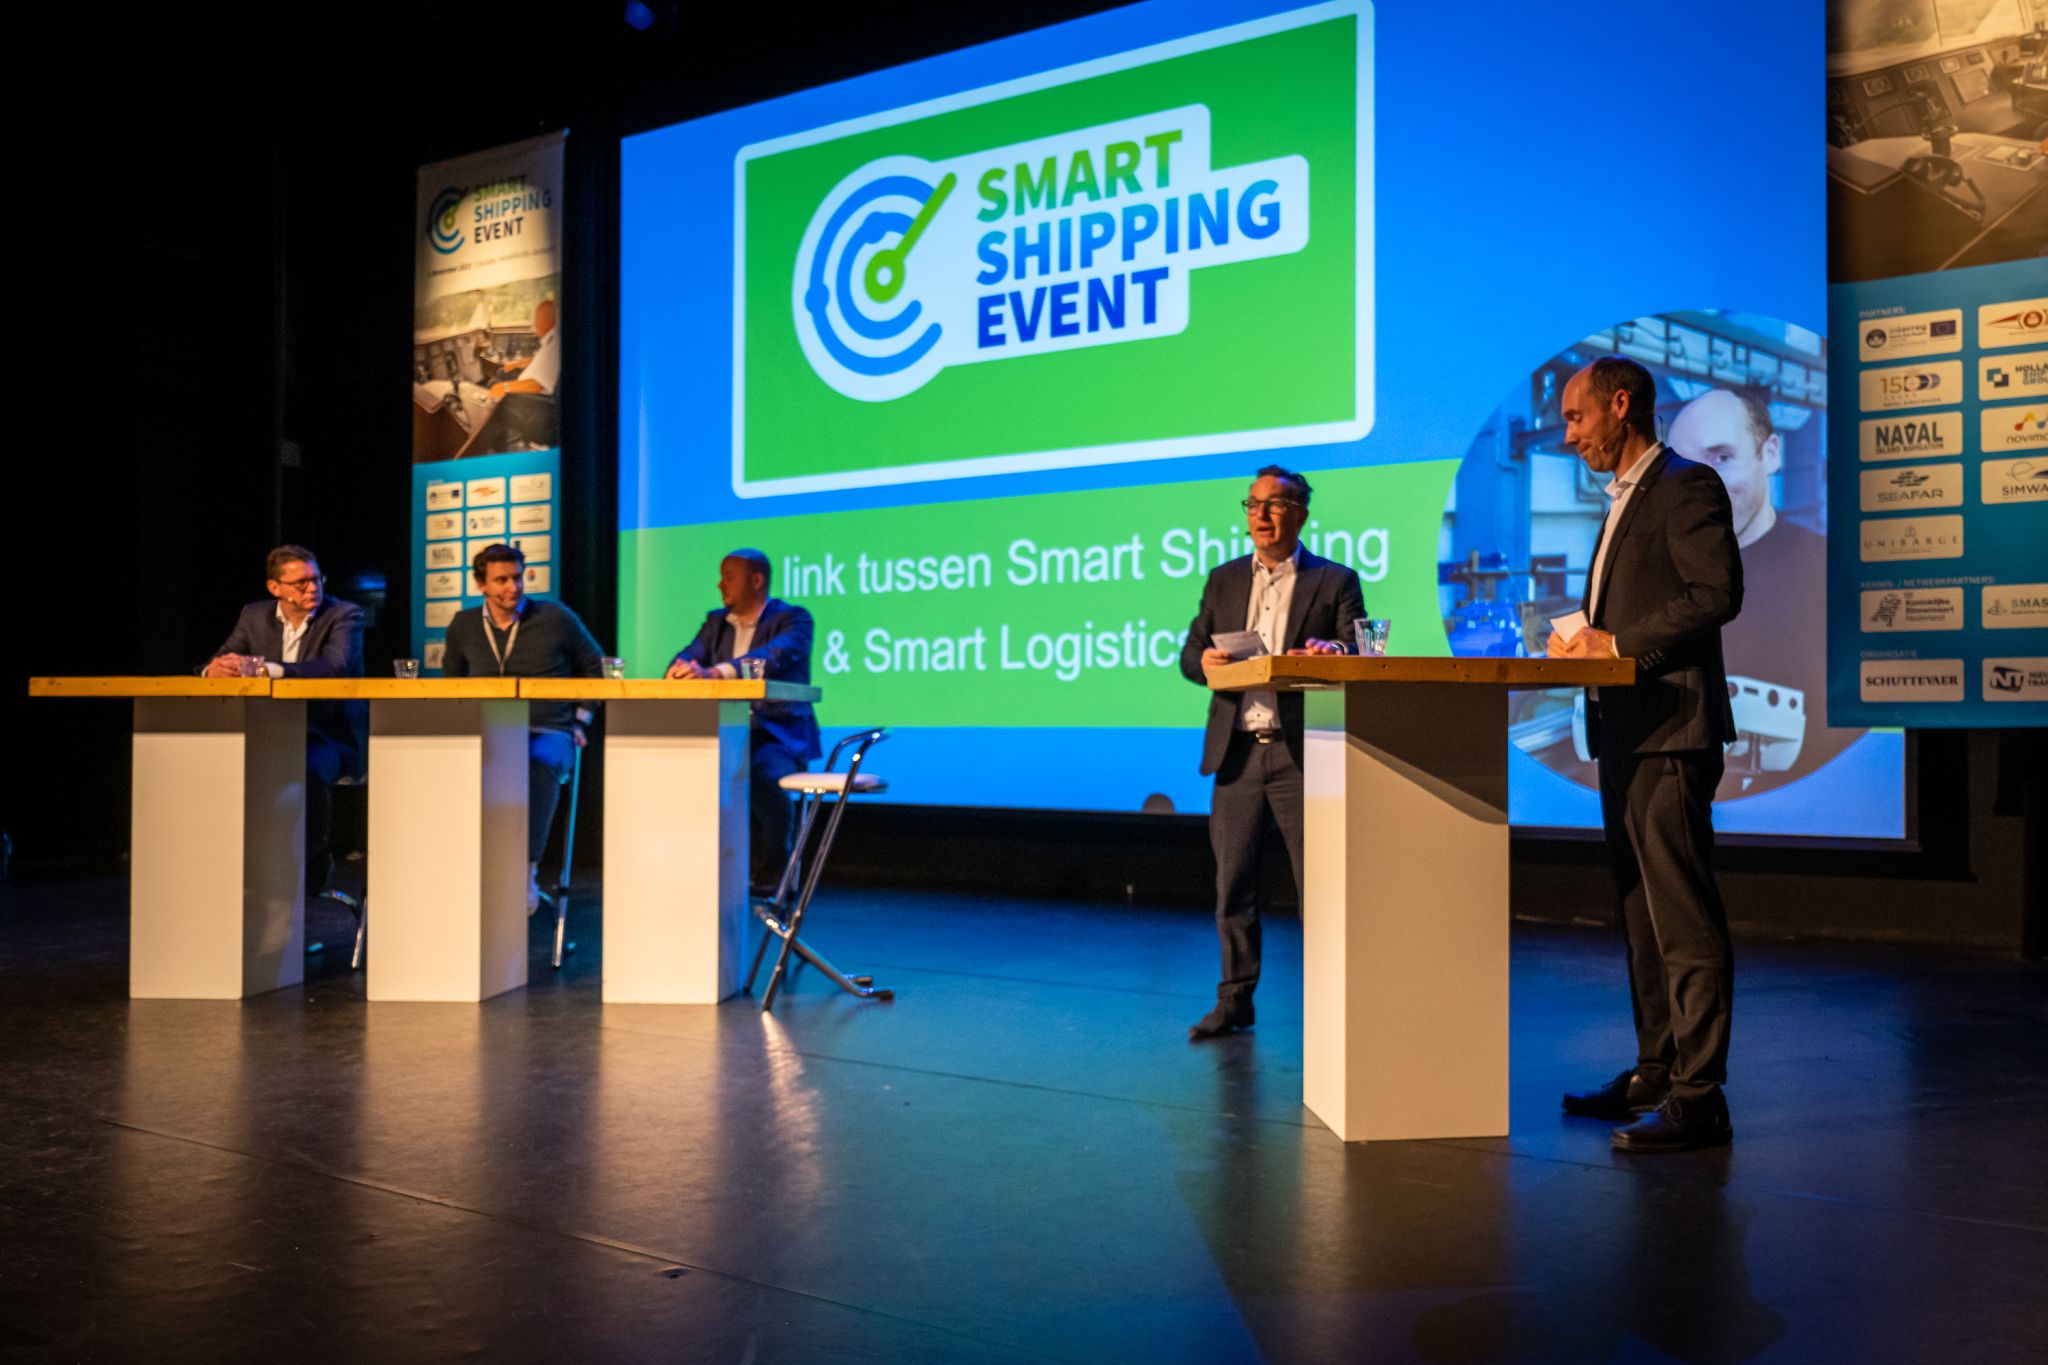 Pictures from the Smart Shipping Event 2022